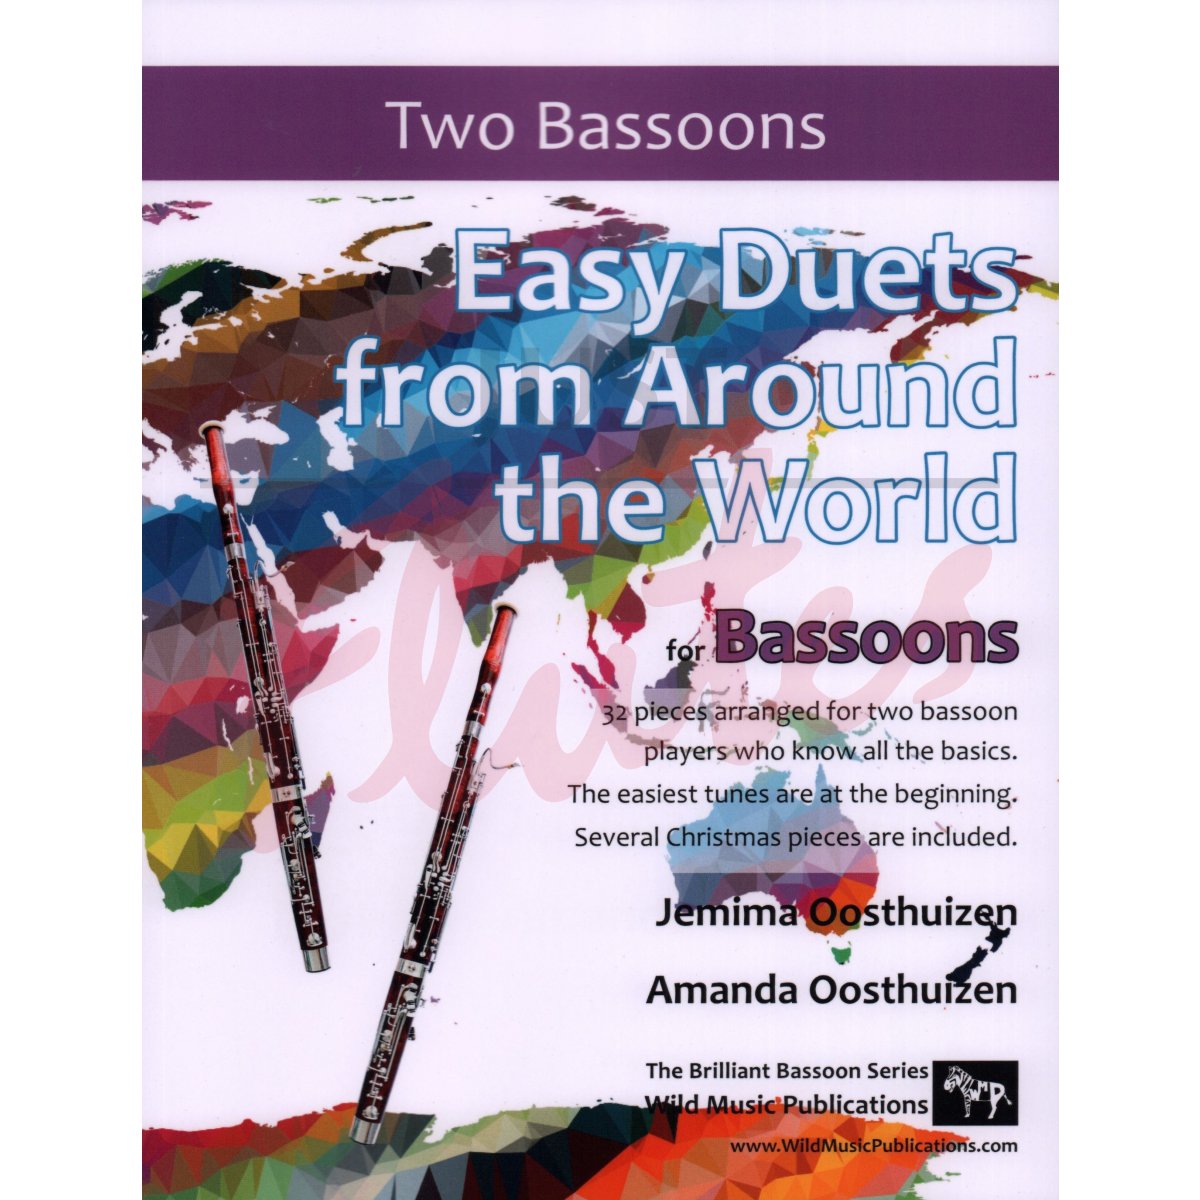 Easy Duets from Around the World for Two Bassoons